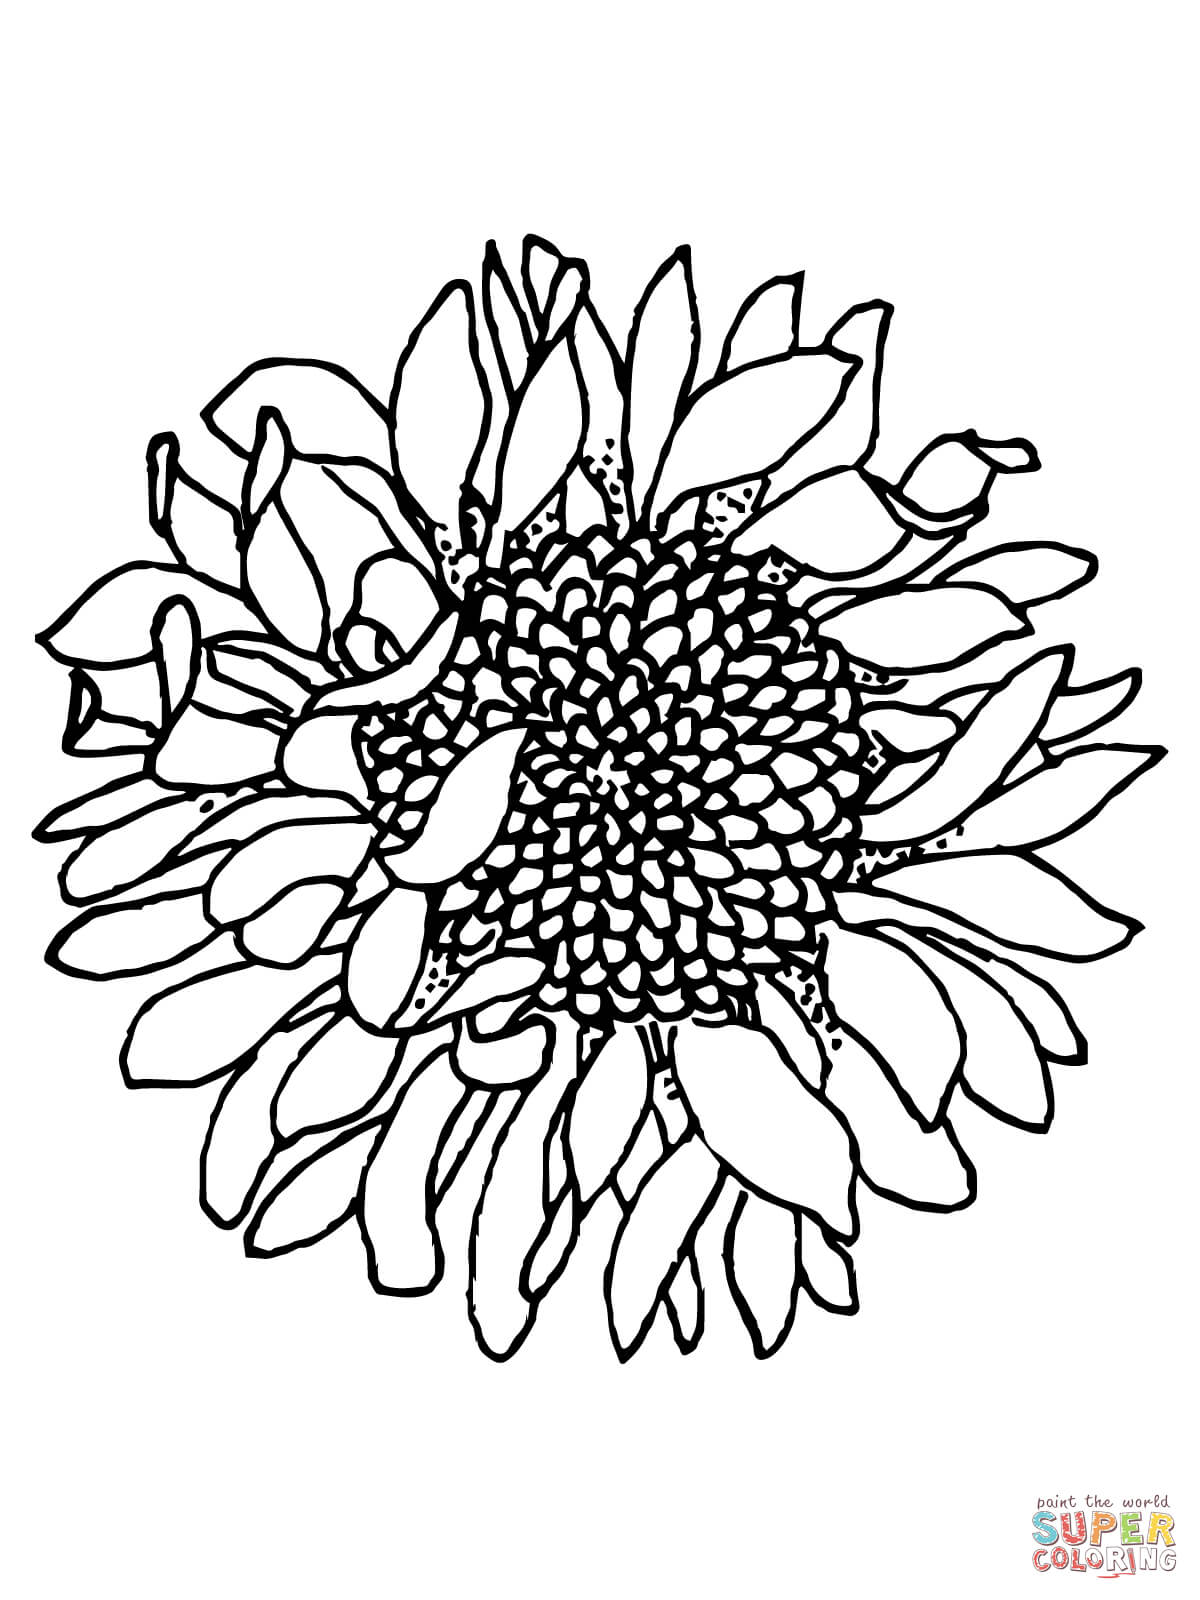 Head of Sunflower coloring page | Free Printable Coloring Pages